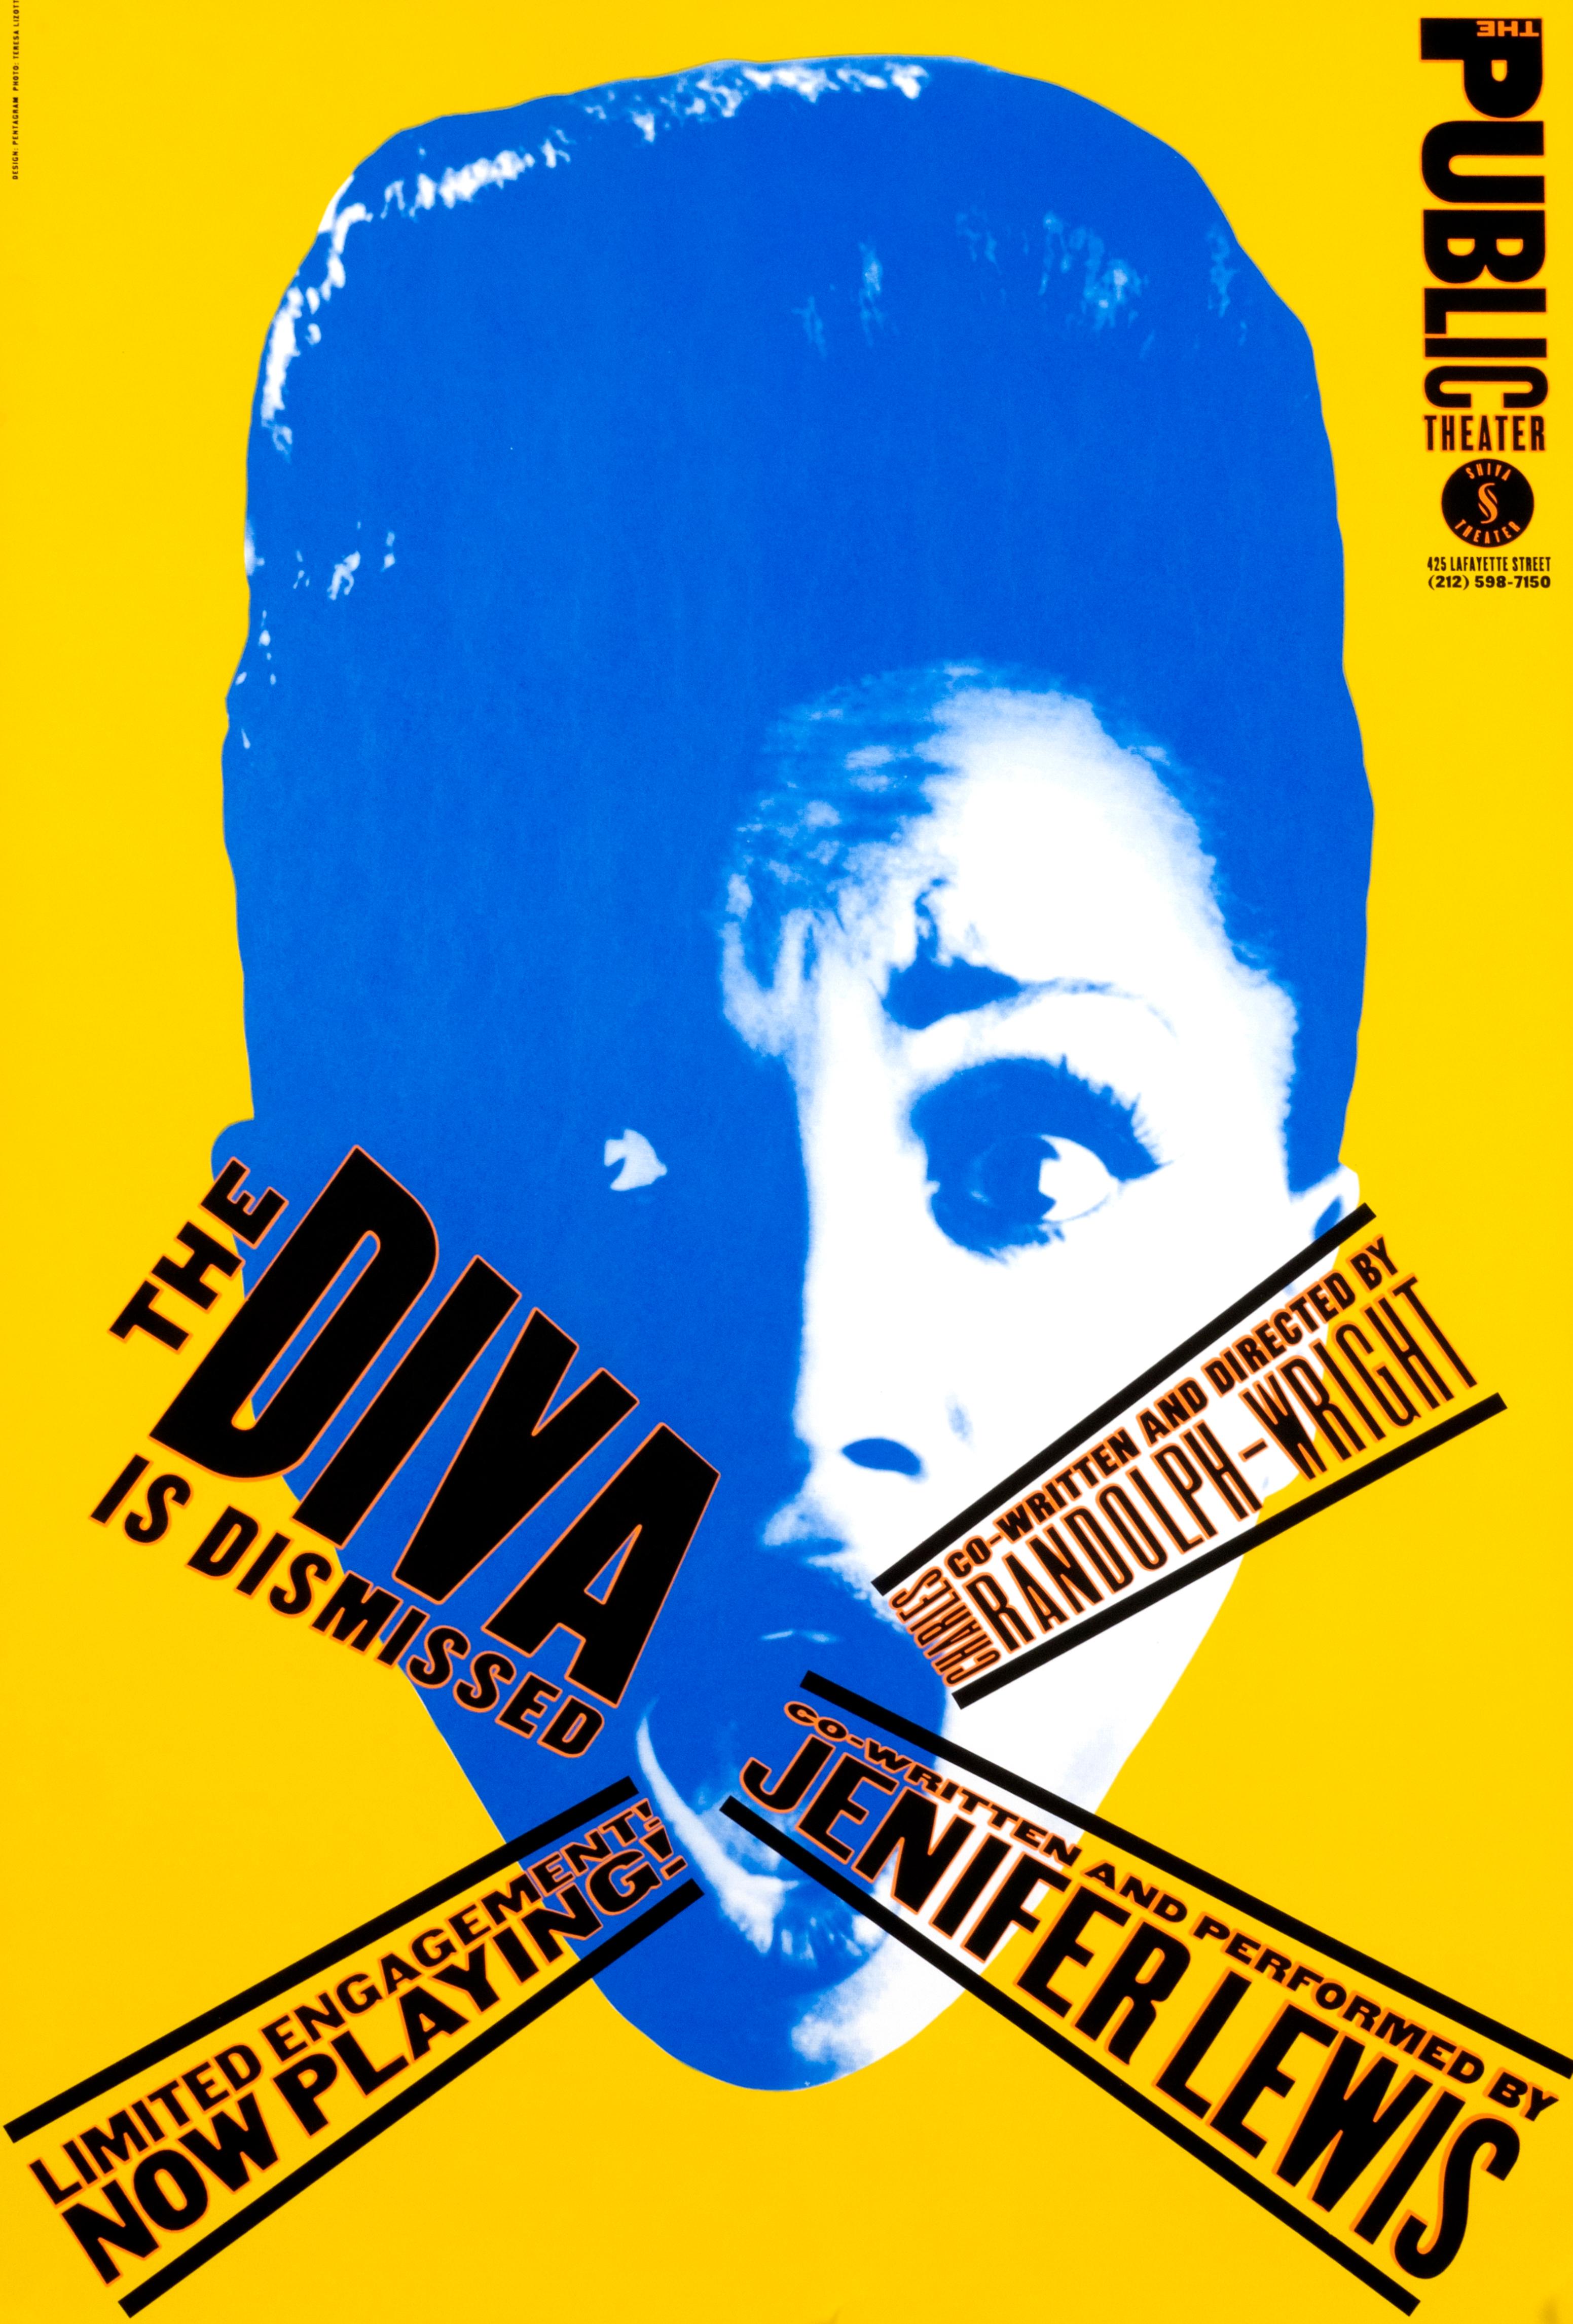 "The Diva is Dismissed - Public Theater" Original Vintage Theater Poster - Print by Paula Scher